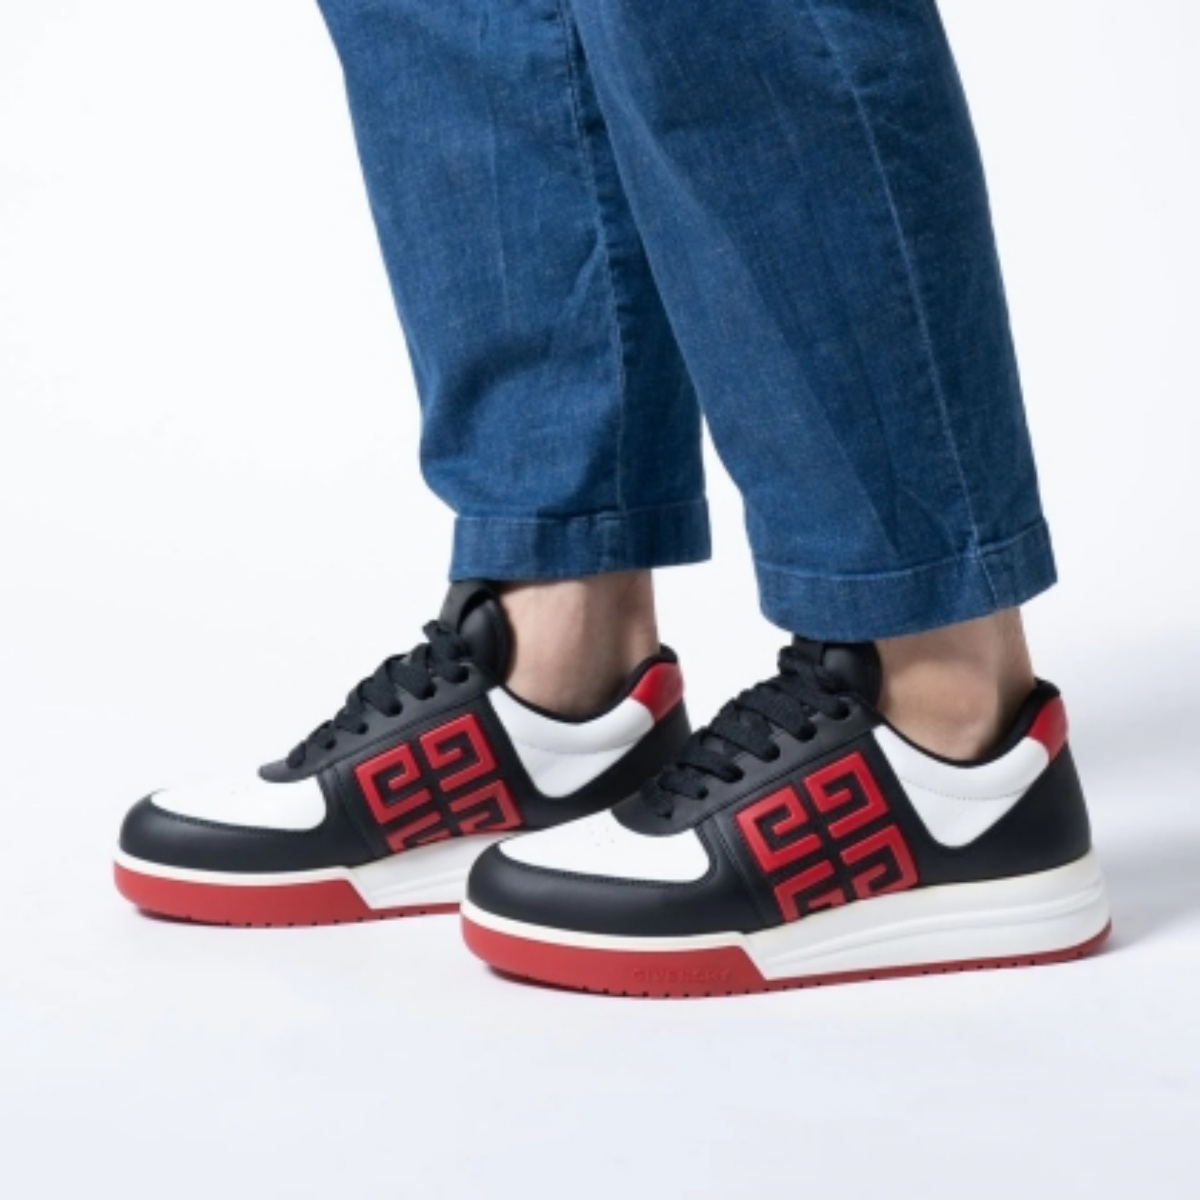 Givenchy 4G Emblem Low Top Sneakers Leather Black/Red